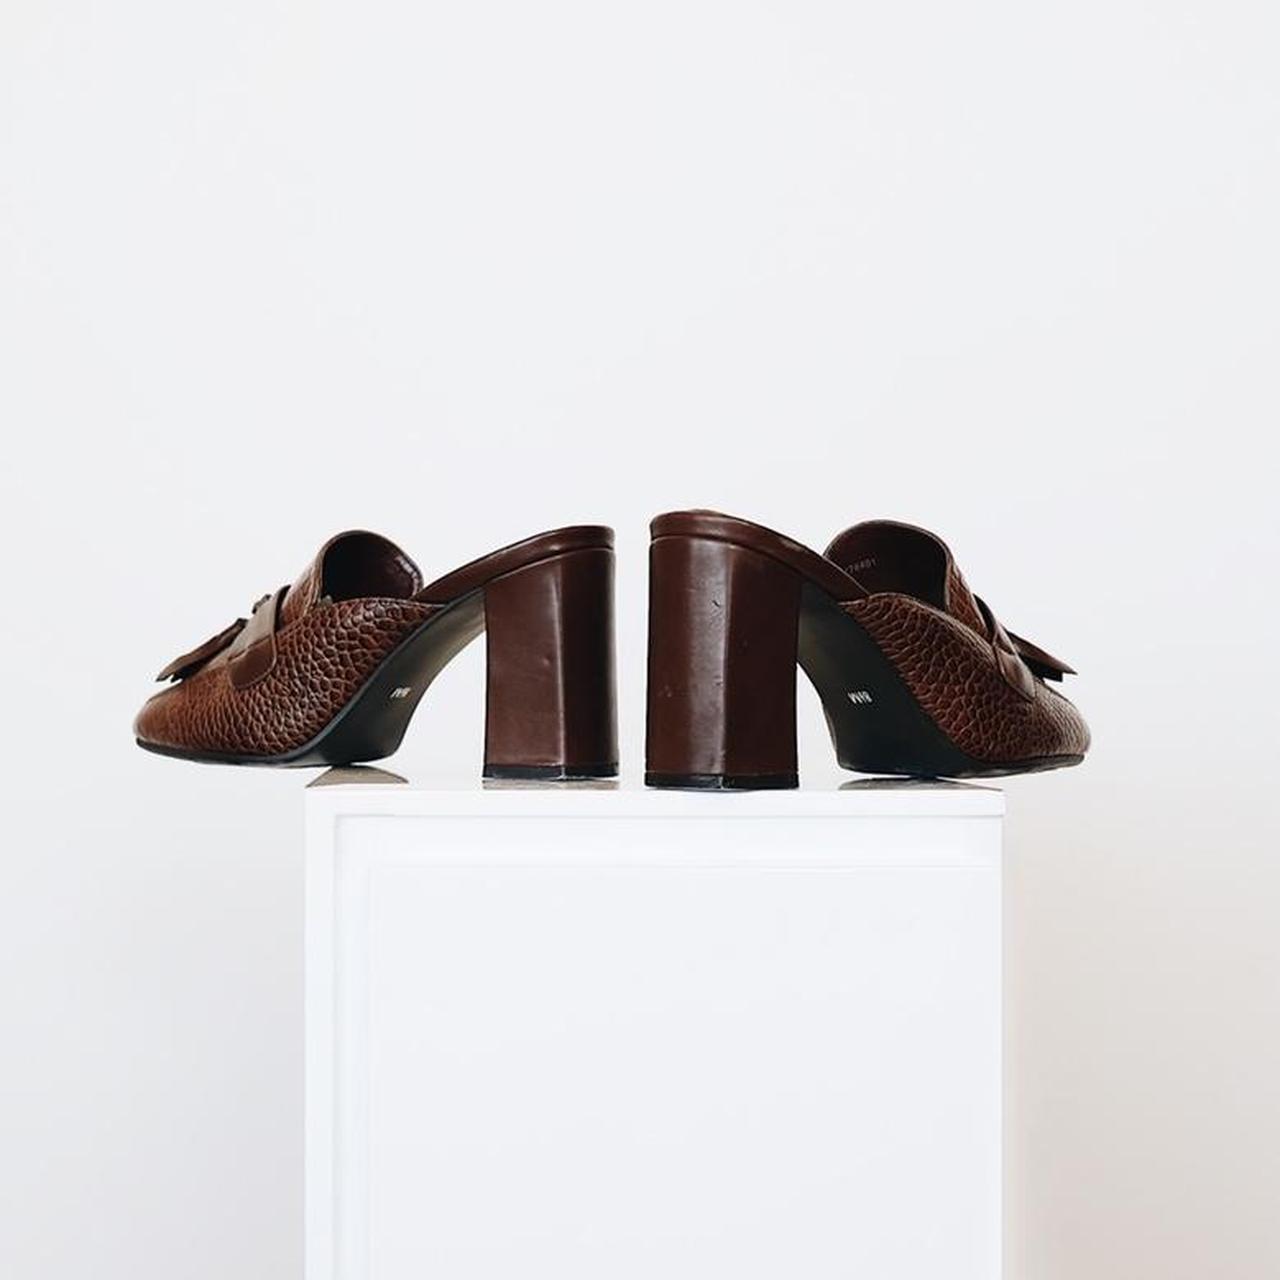 Product Image 4 - Brown Leather Mules

* If you